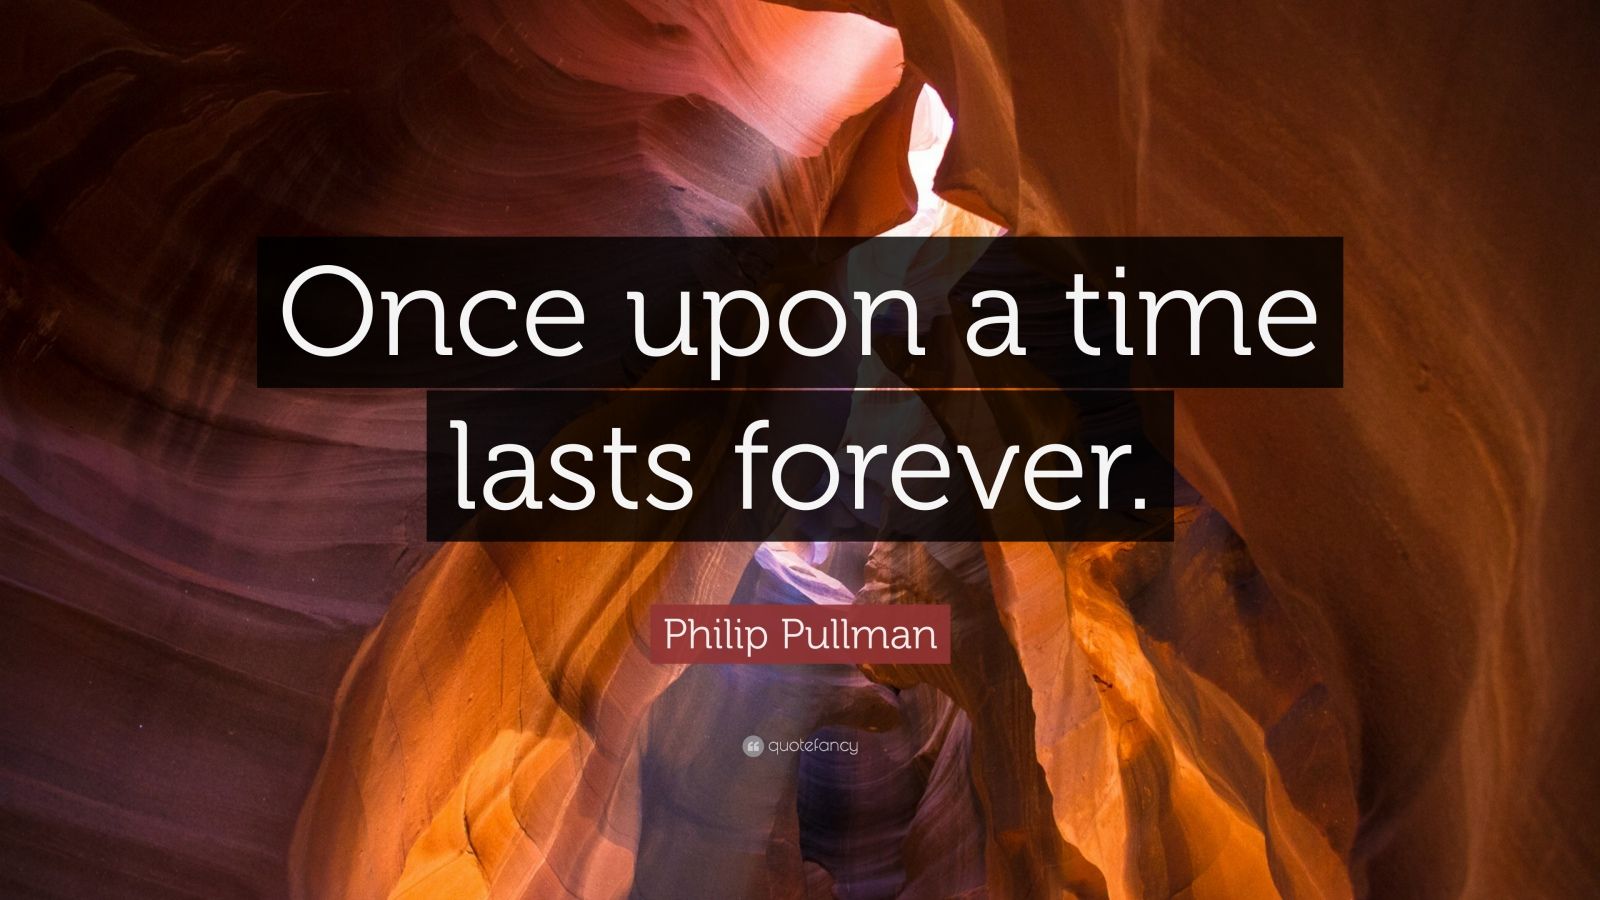 Philip Pullman Quote “ ce upon a time lasts forever ”